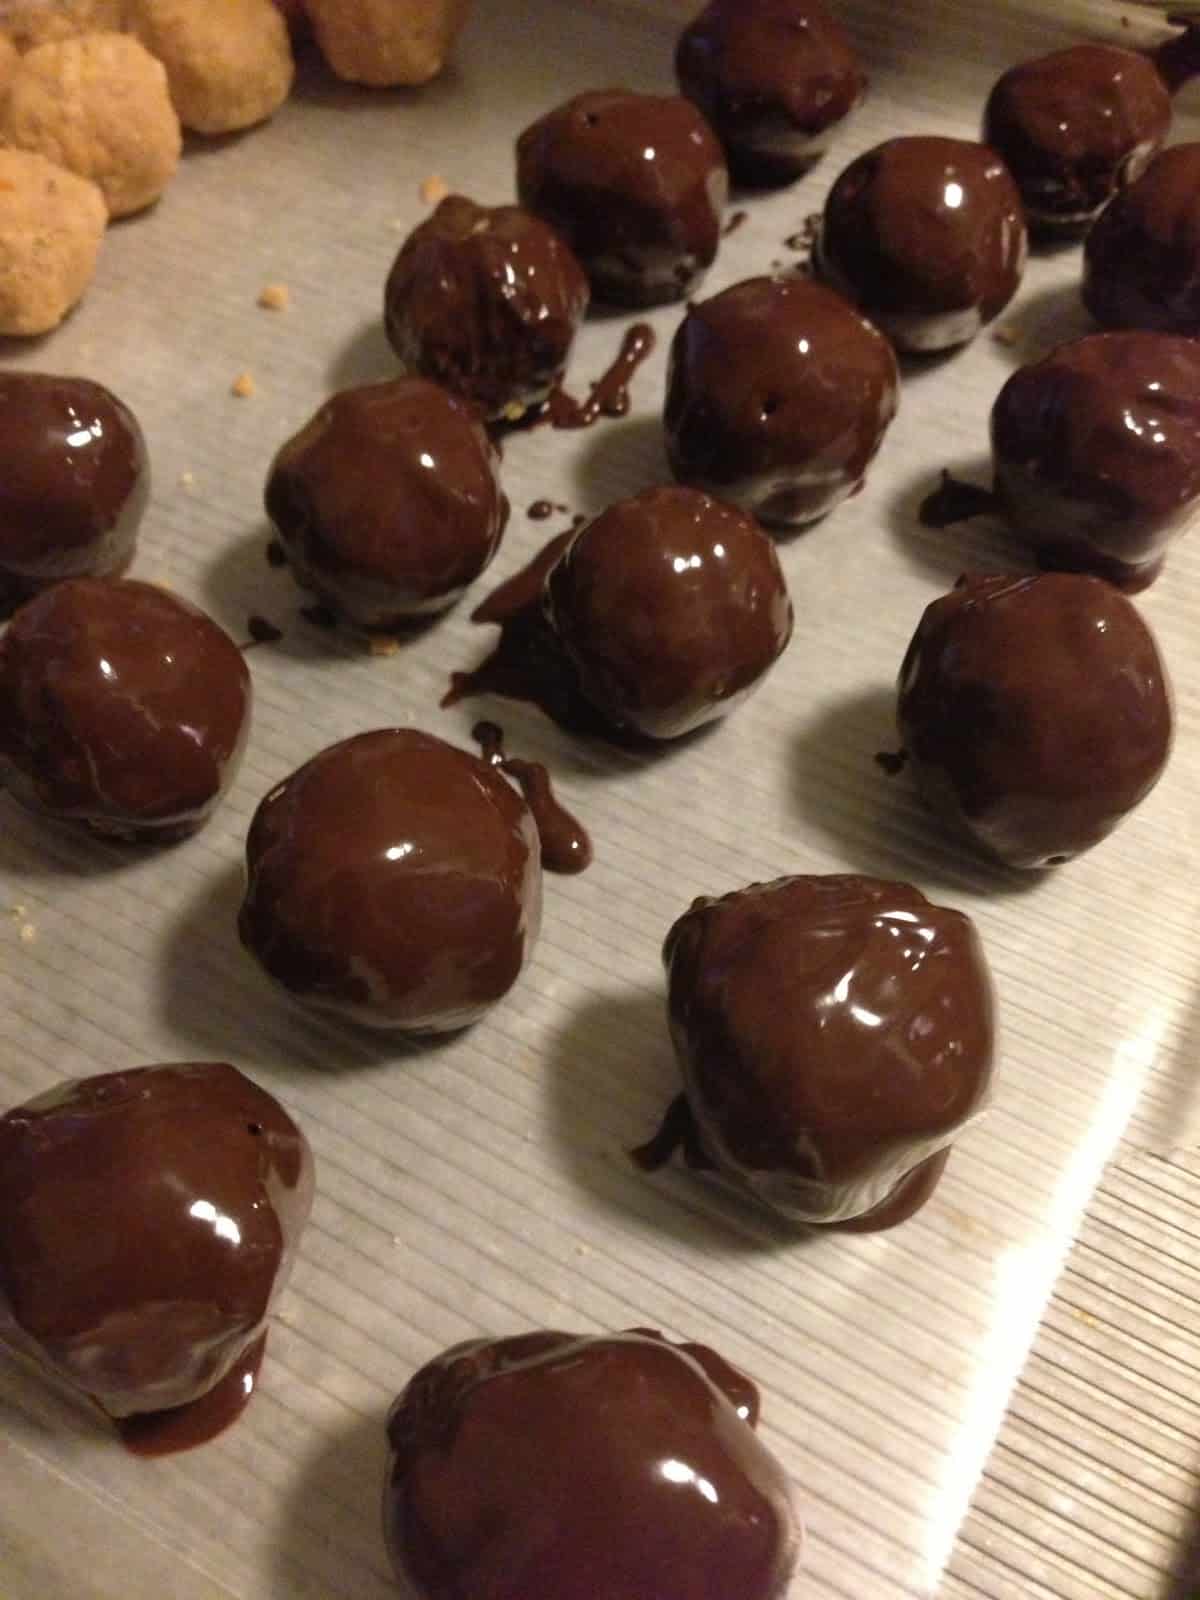 Buckeye Balls drying after being dipped in chocolate